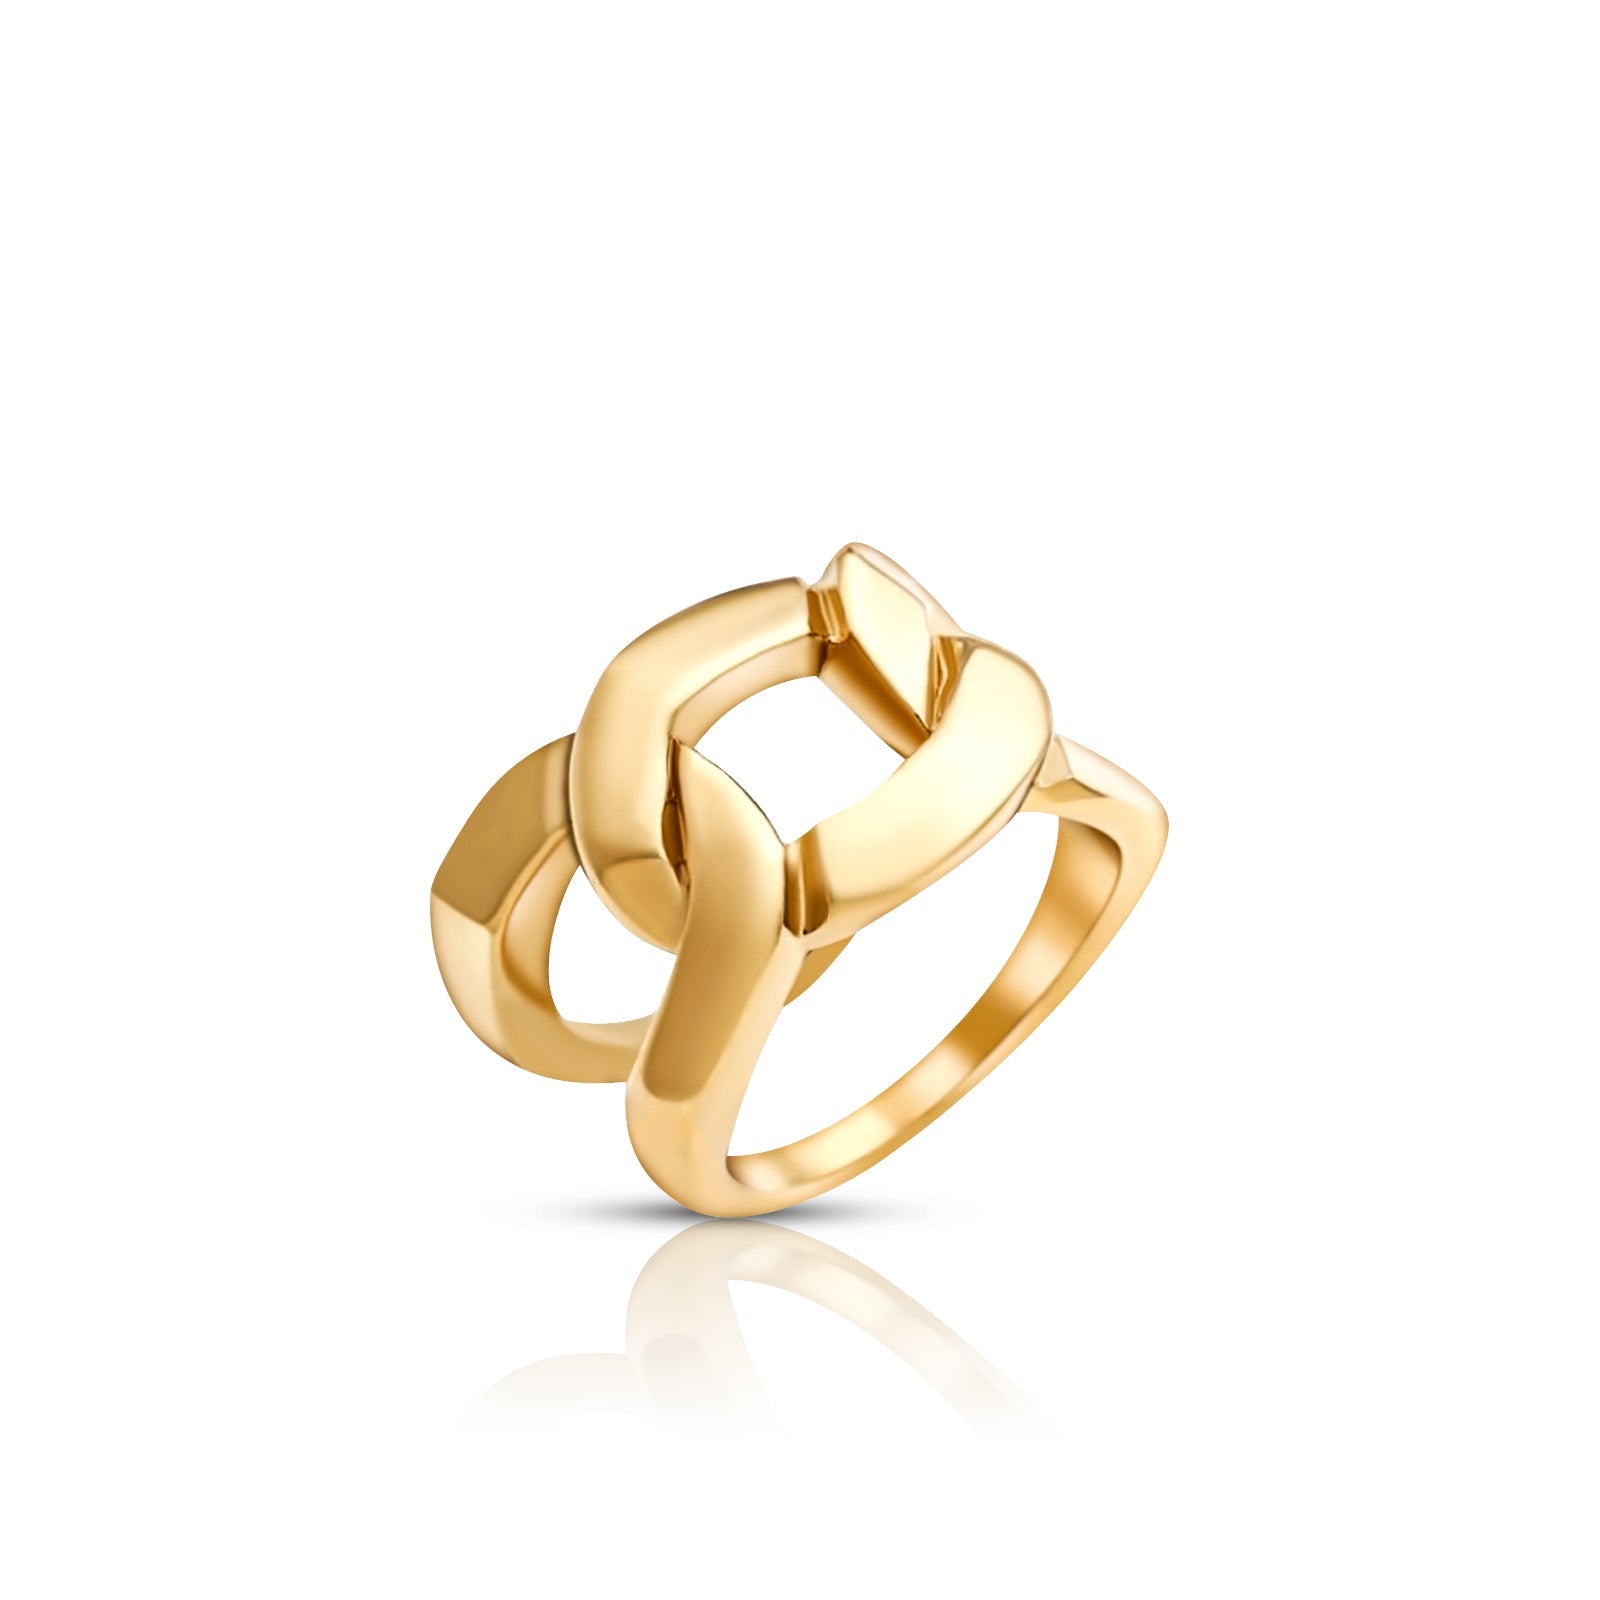 Brooklyn Chain Ring - Gold - Size 6